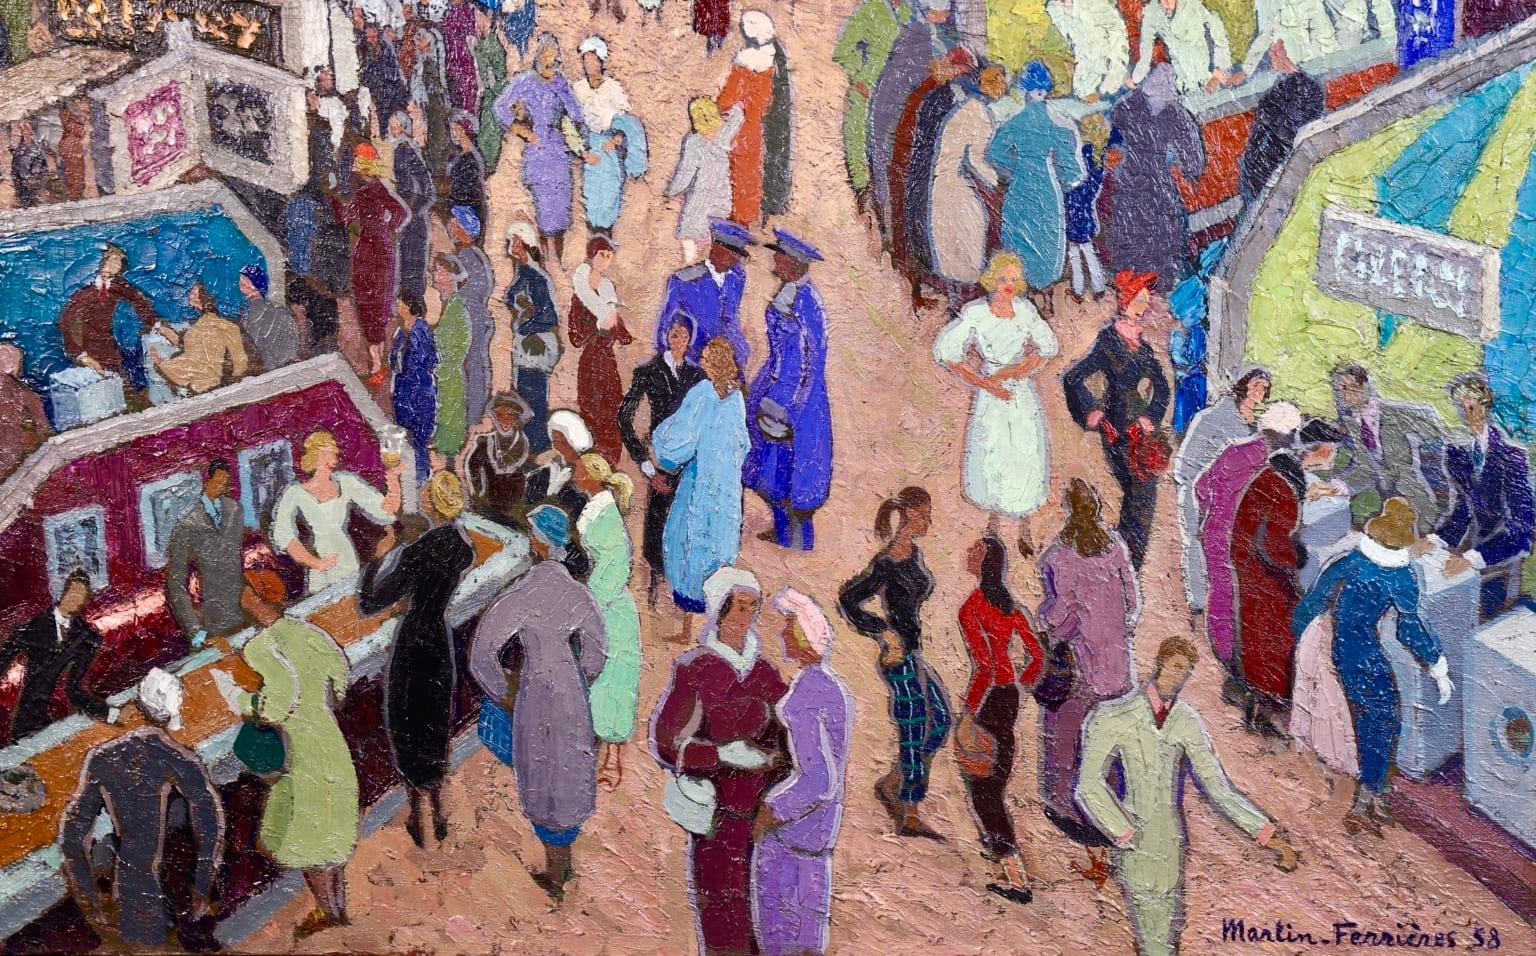 Figures at Household Arts Show - Post Impressionist Oil by J Martin-Ferrieres - Brown Figurative Painting by Jacques Martin-Ferrières